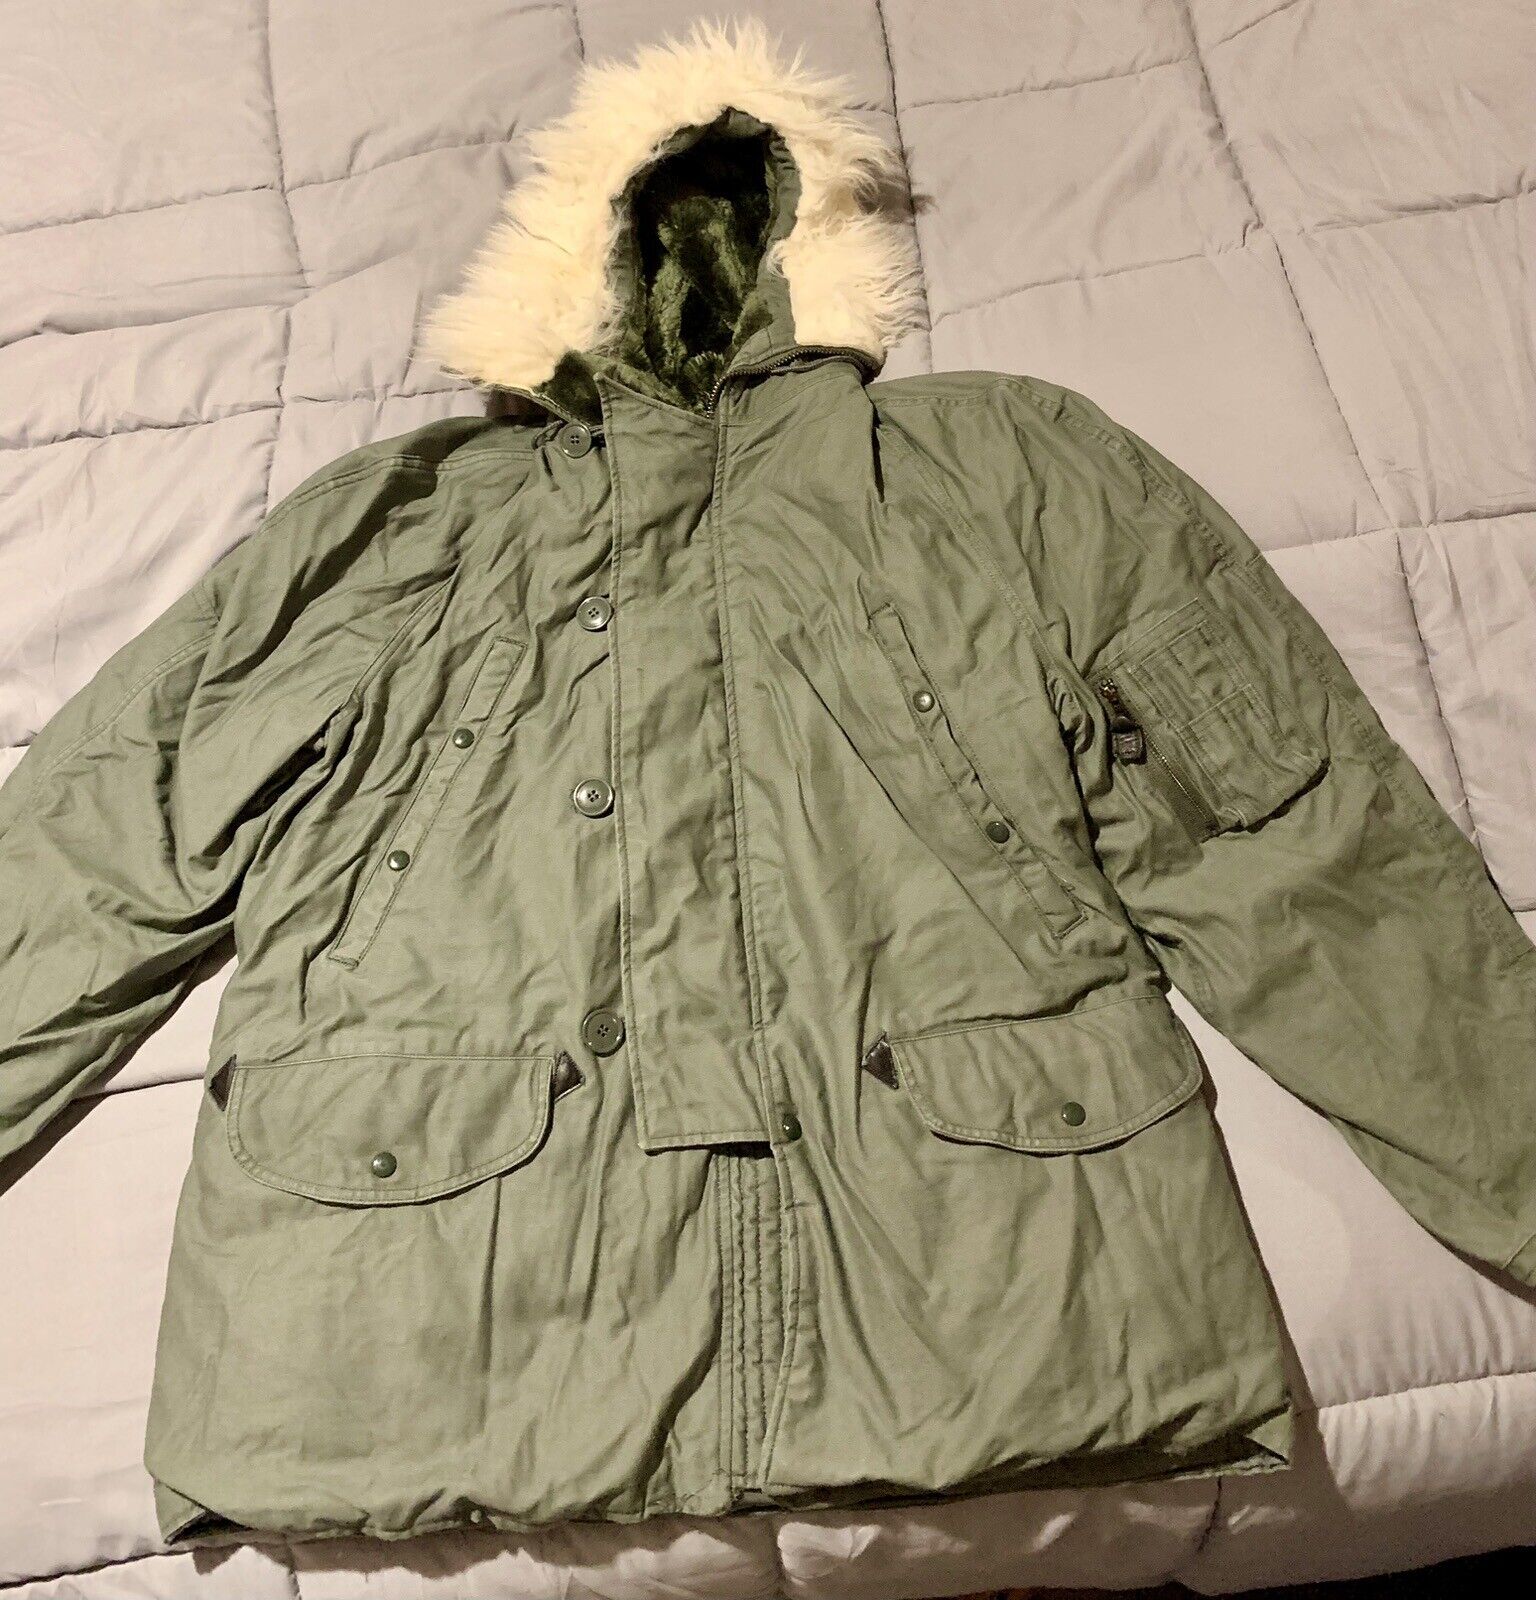 *NEW* - Large Ext . Cold Weather Parka - Type N3B - Fur Hood - US Army/Air Force